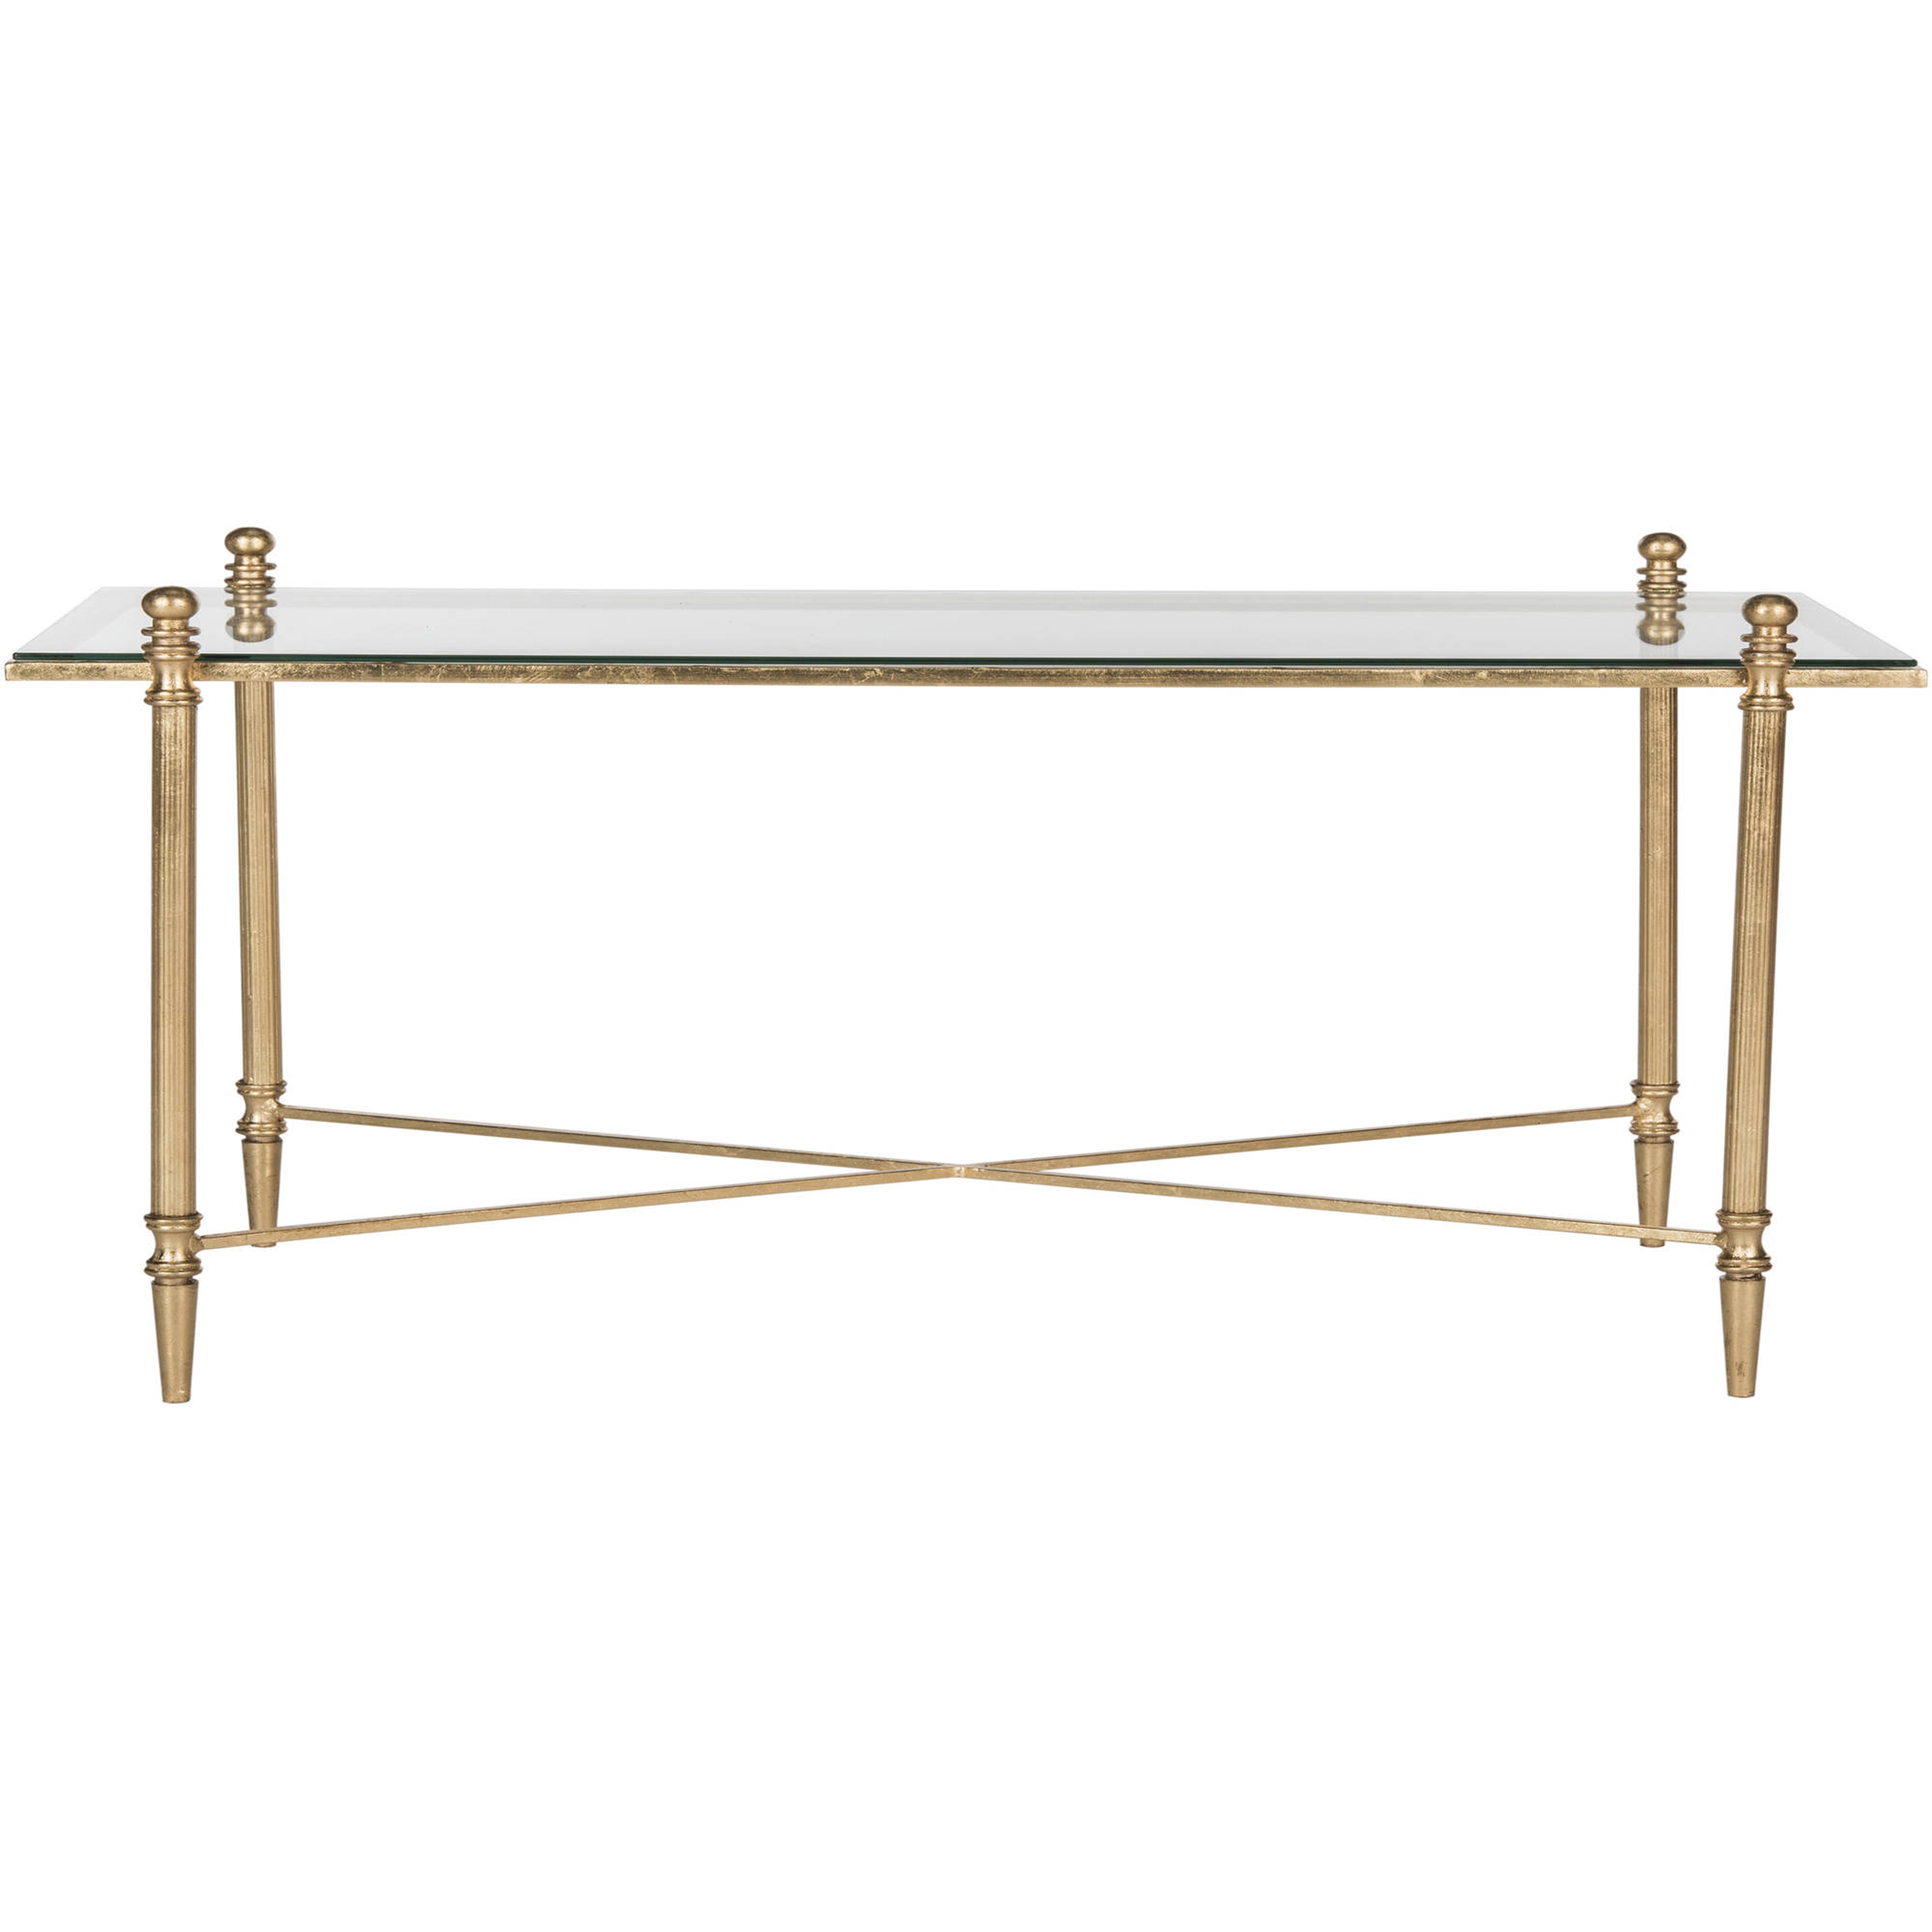 Tait Coffee Table - Antique Gold - Arlo Home - Arlo Home